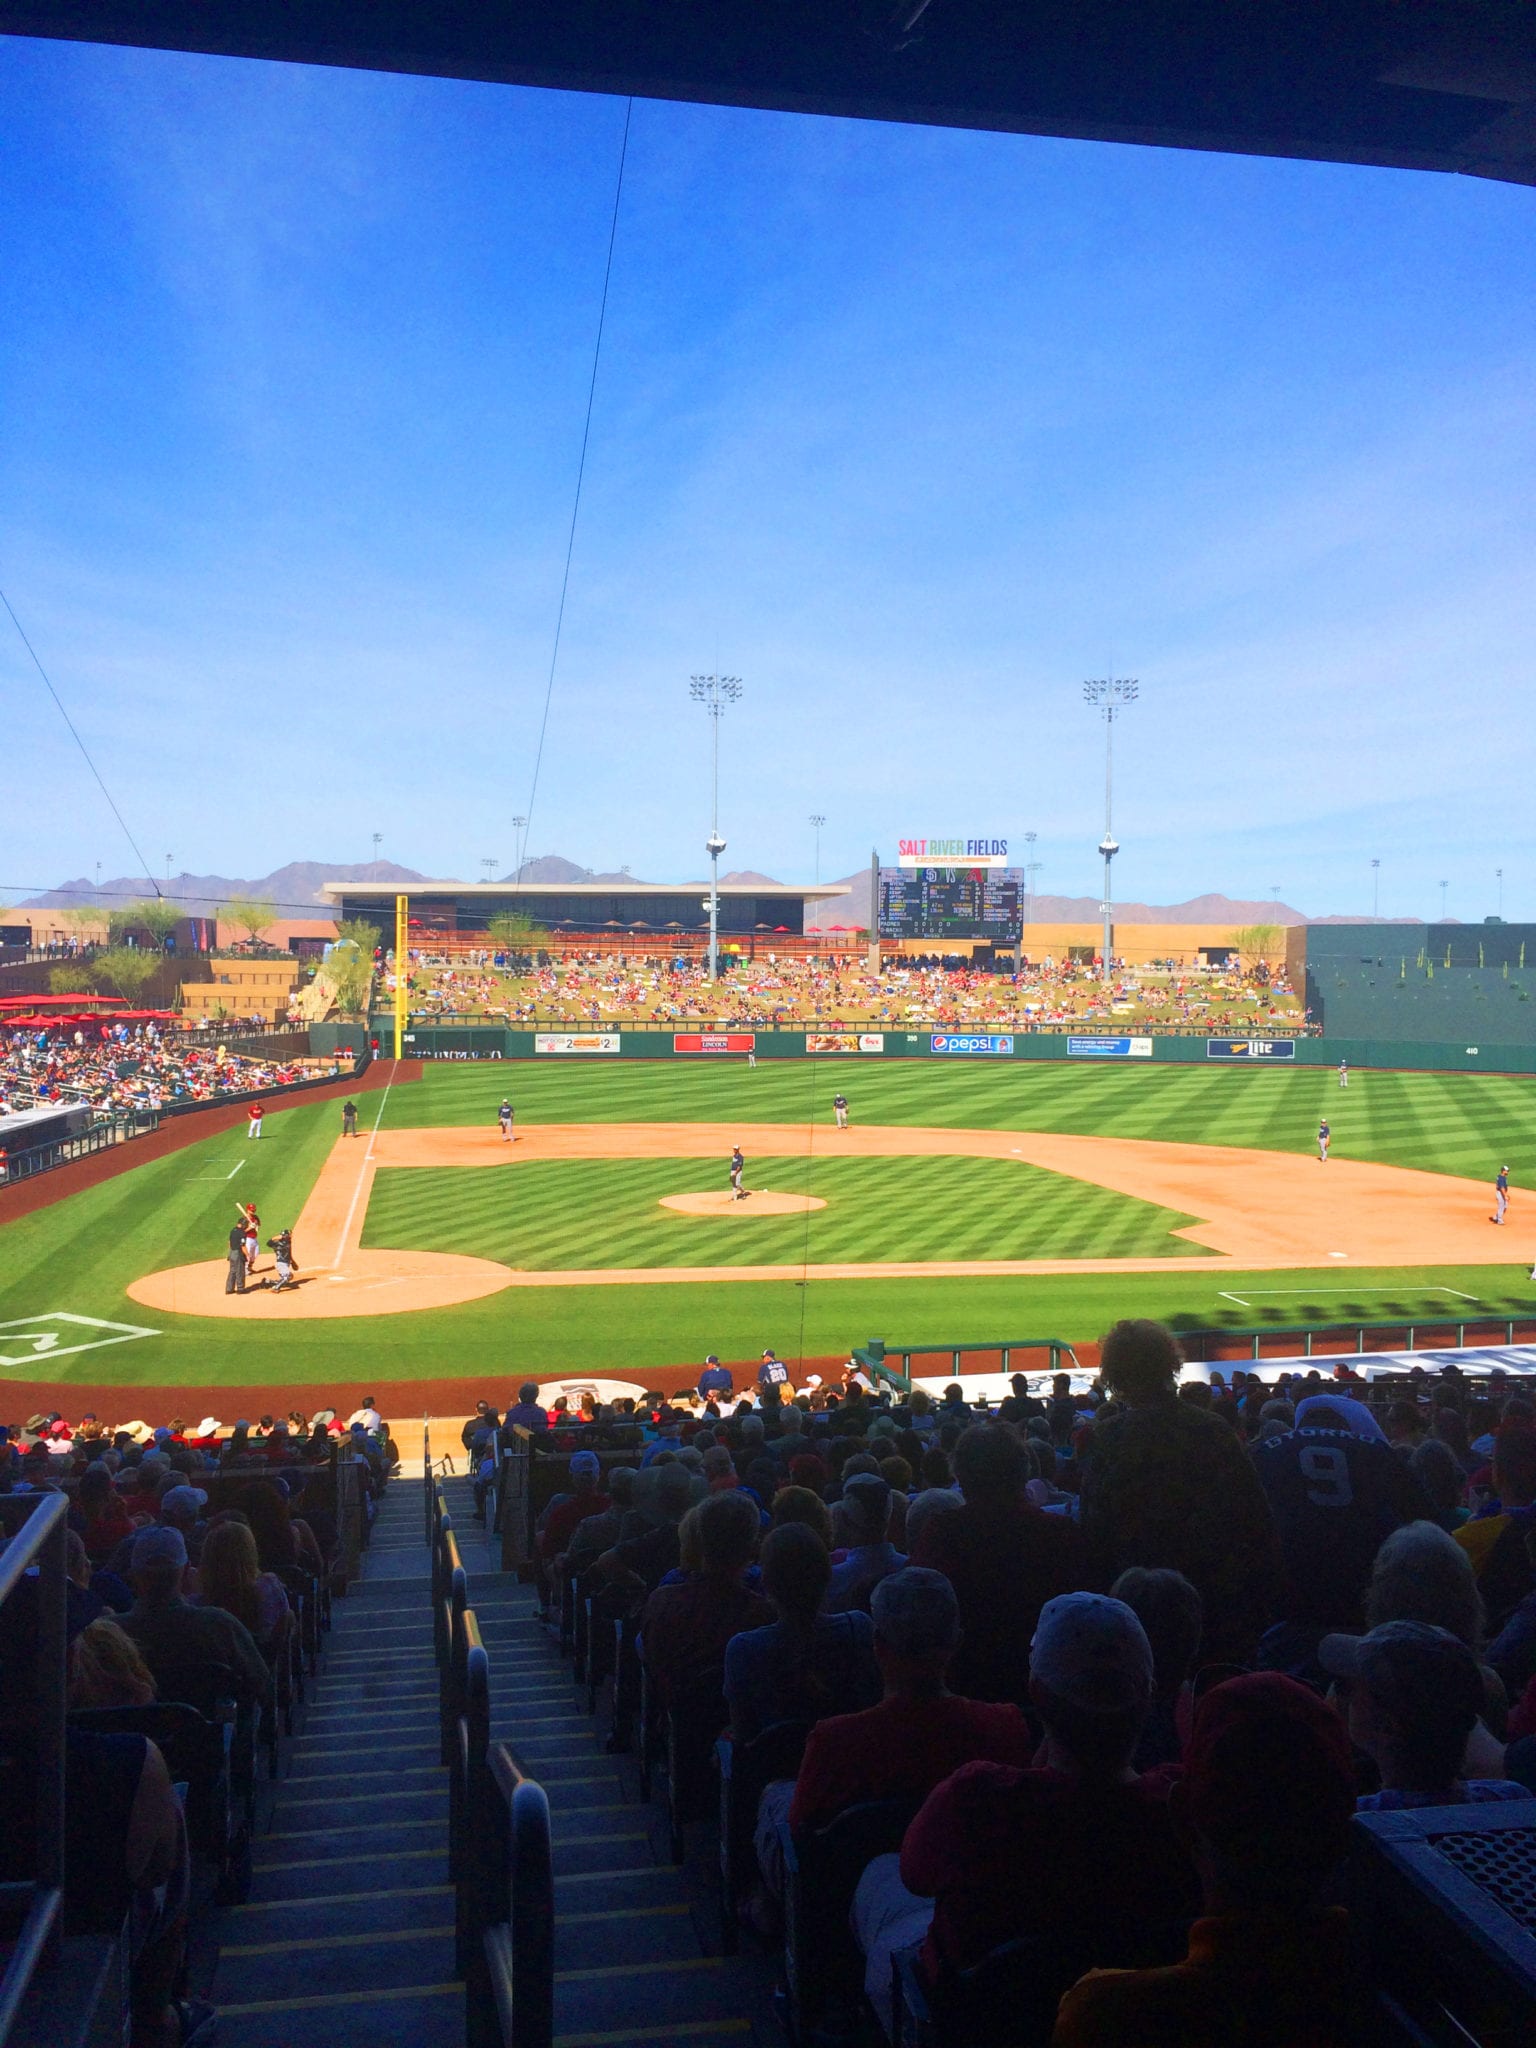 The Ultimate Guide to Cactus League Baseball Phoenix Spring Training